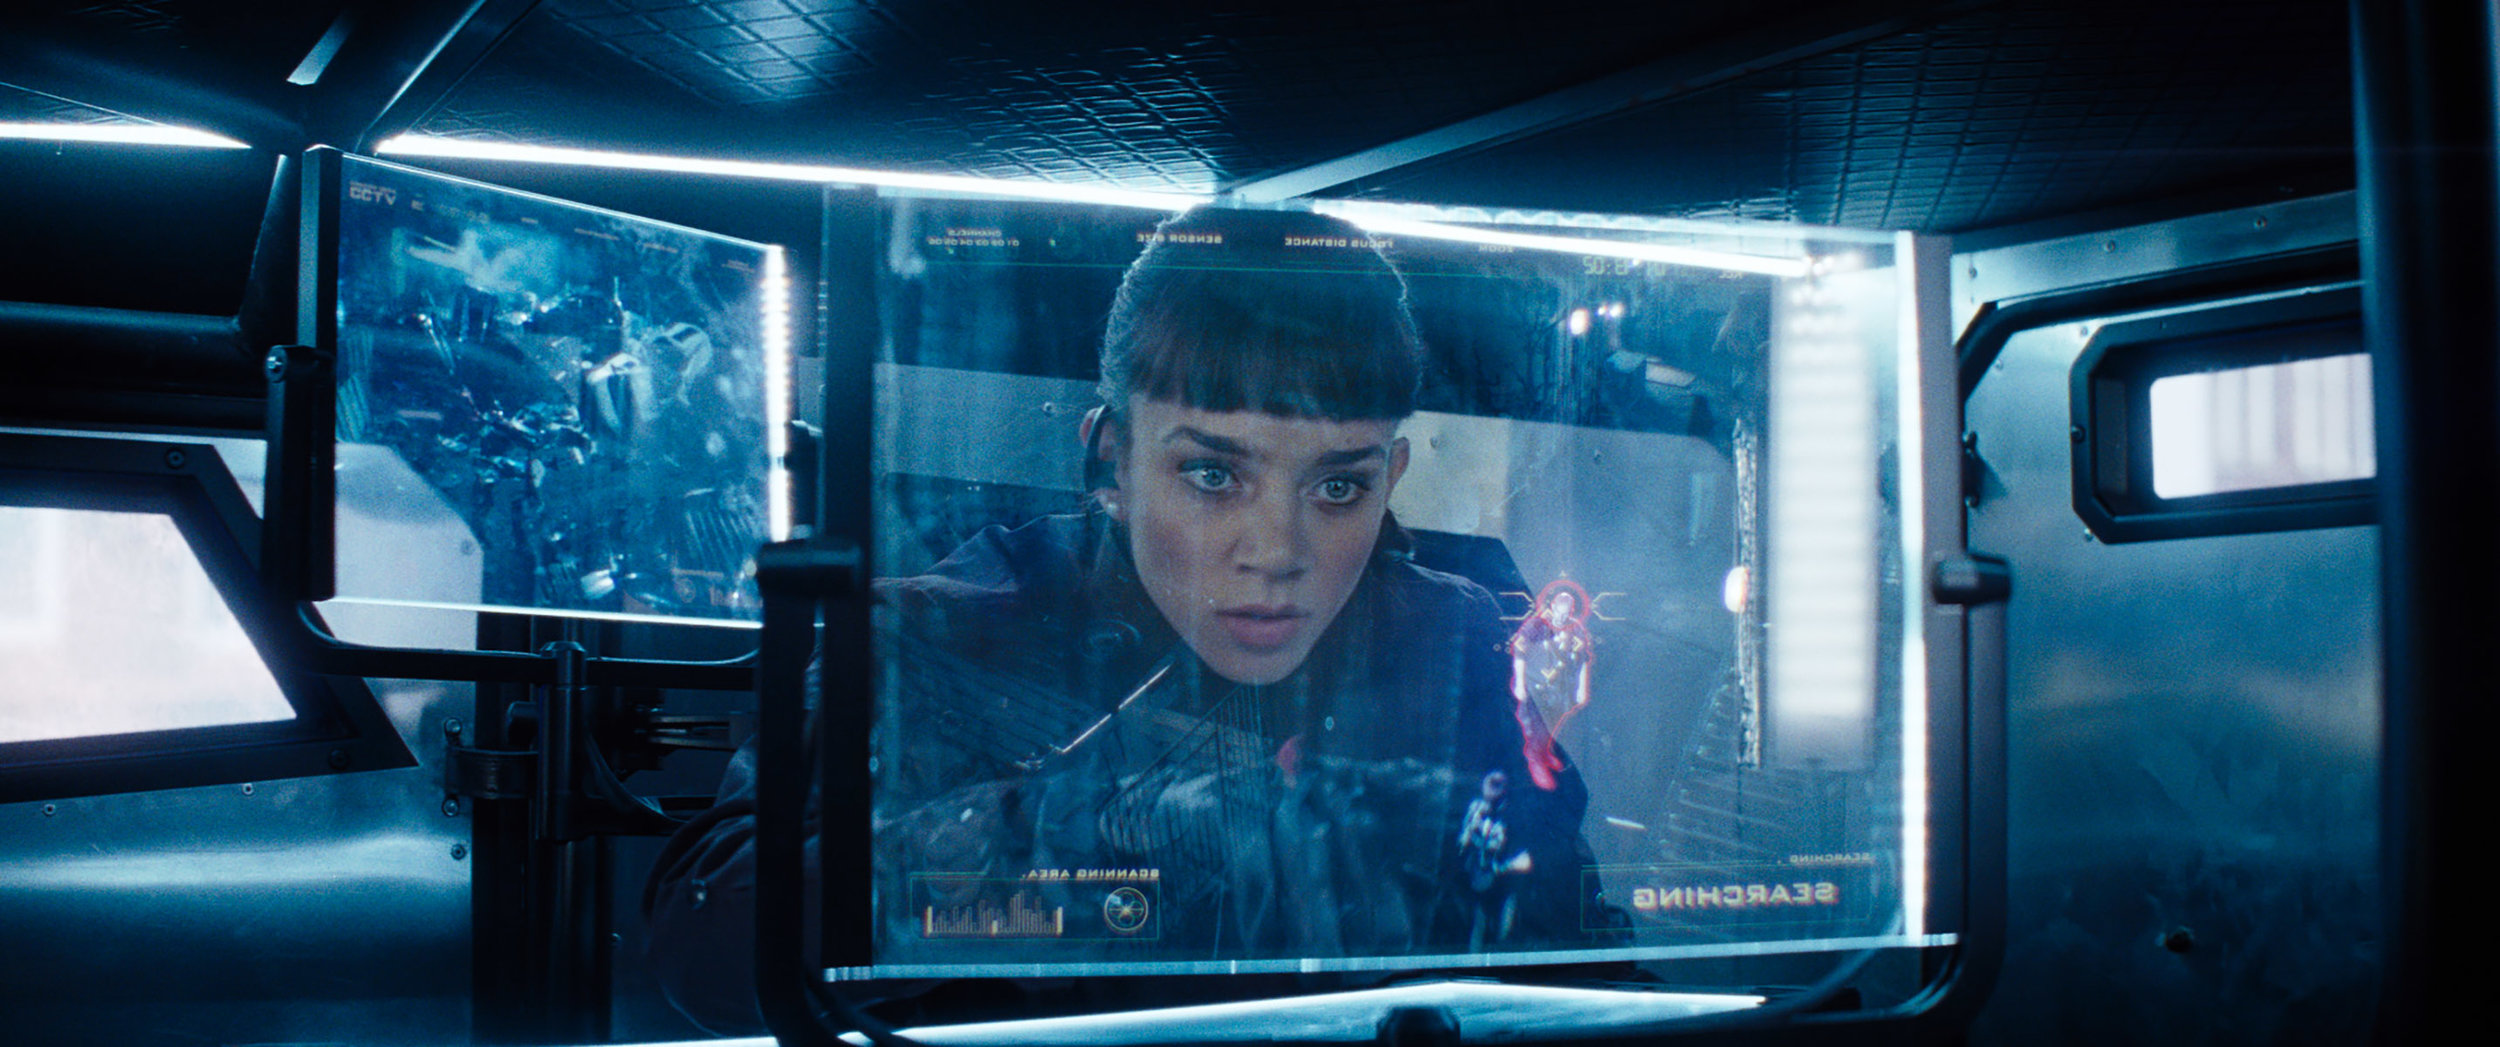 60 Photos From READY PLAYER ONE Reveal The Avatars of I-R0k and